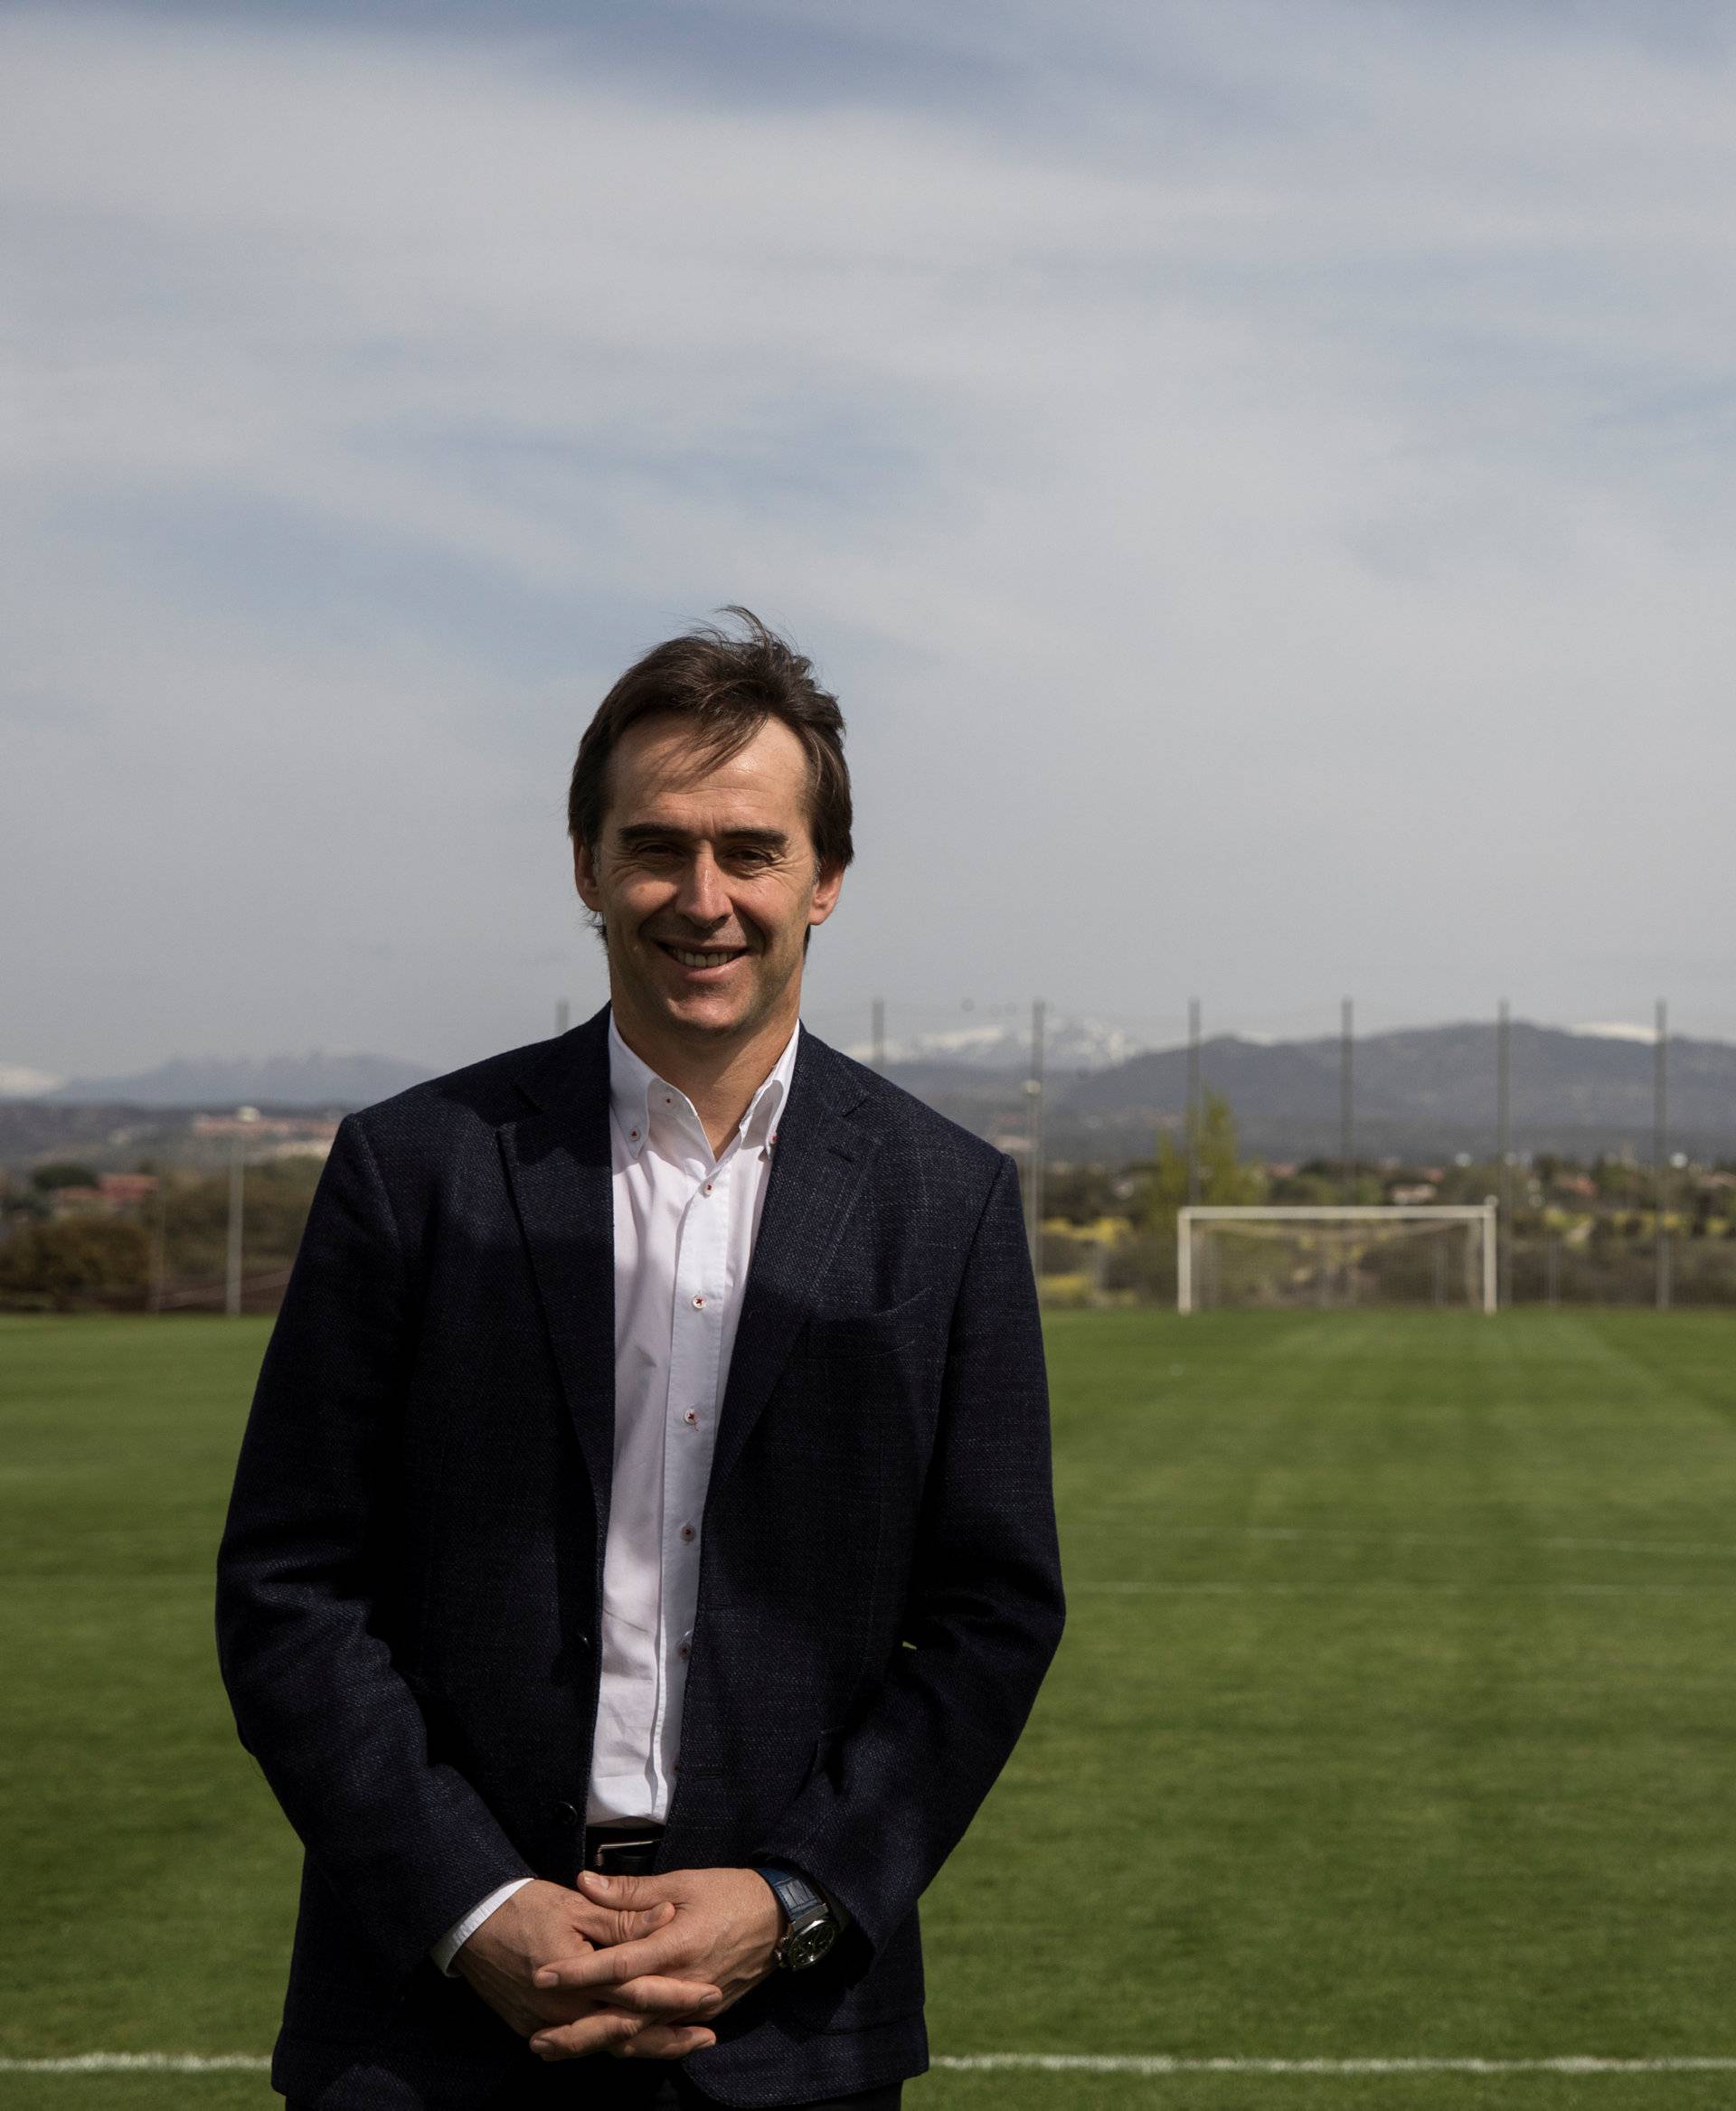 Spain's head coach Lopetegui poses for a portrait at the Spanish Soccer Federation headquarters in Las Rozas, outside Madrid